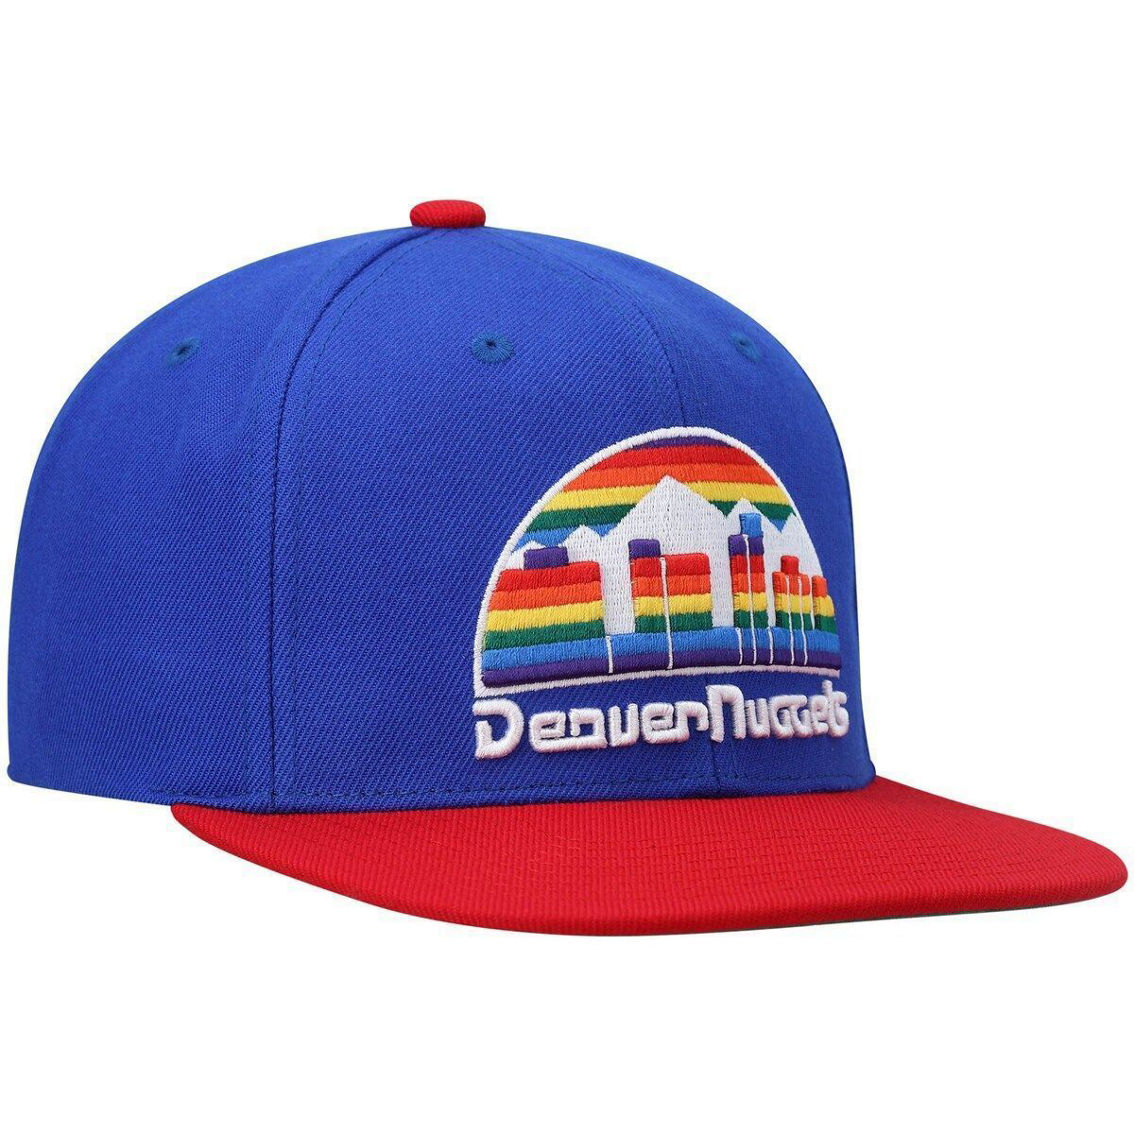 Mitchell & Ness Men's Royal/Red Denver Nuggets Hardwood Classics Team Two-Tone 2.0 Snapback Hat - Image 4 of 4